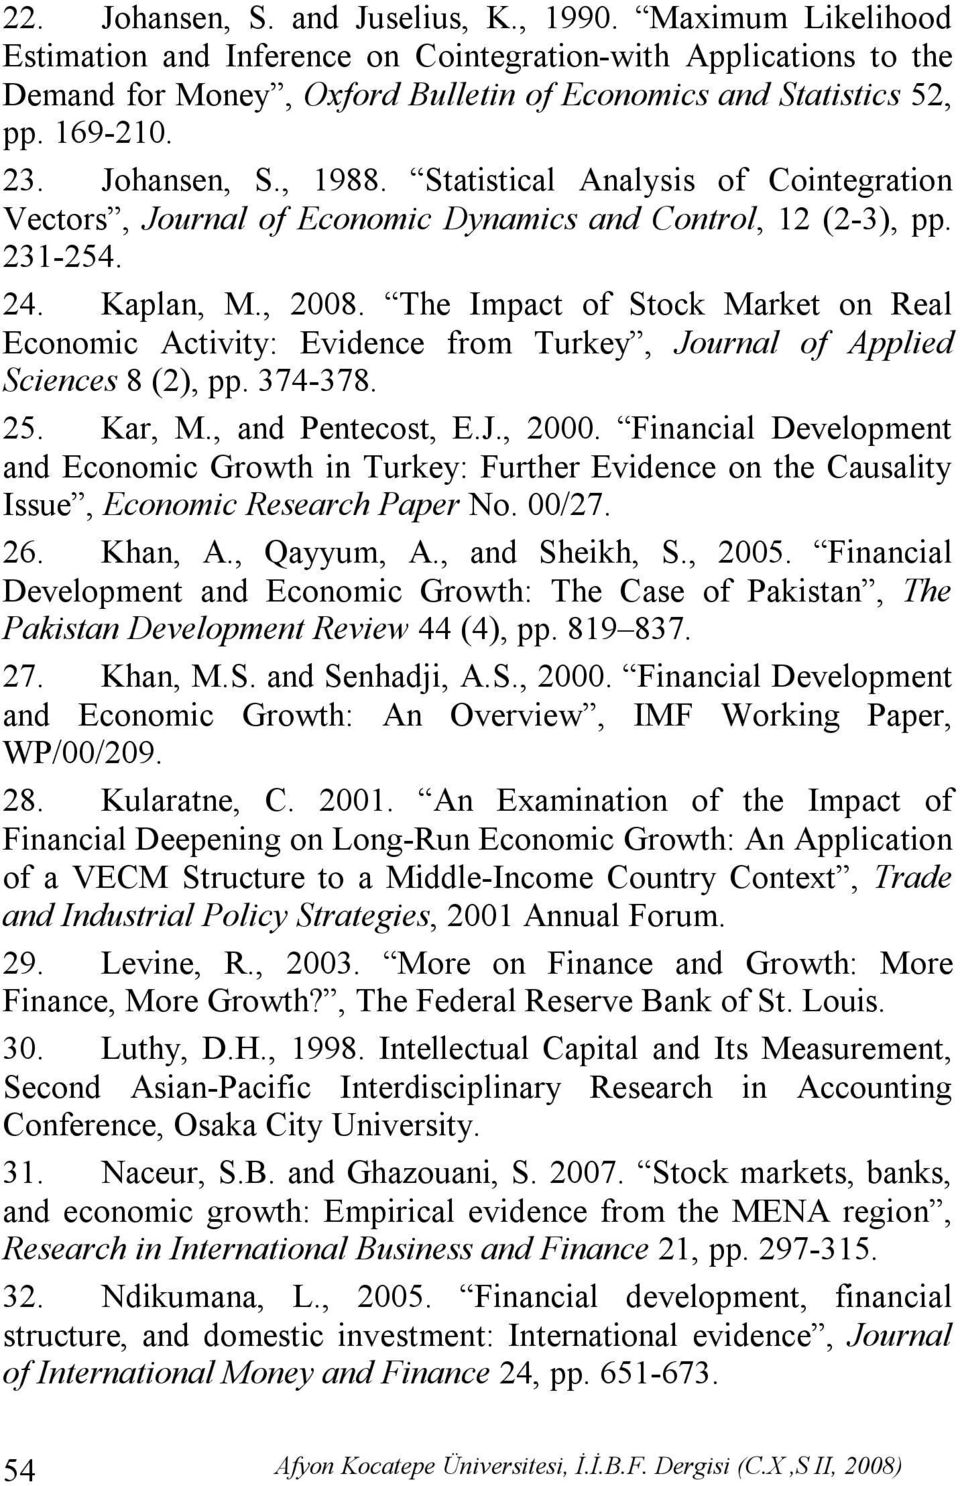 The Impact of Stock Market on Real Economic Activity: Evidence from Turkey, Journal of Applied Sciences 8 (2), pp. 374-378. 25. Kar, M., and Pentecost, E.J., 2000.